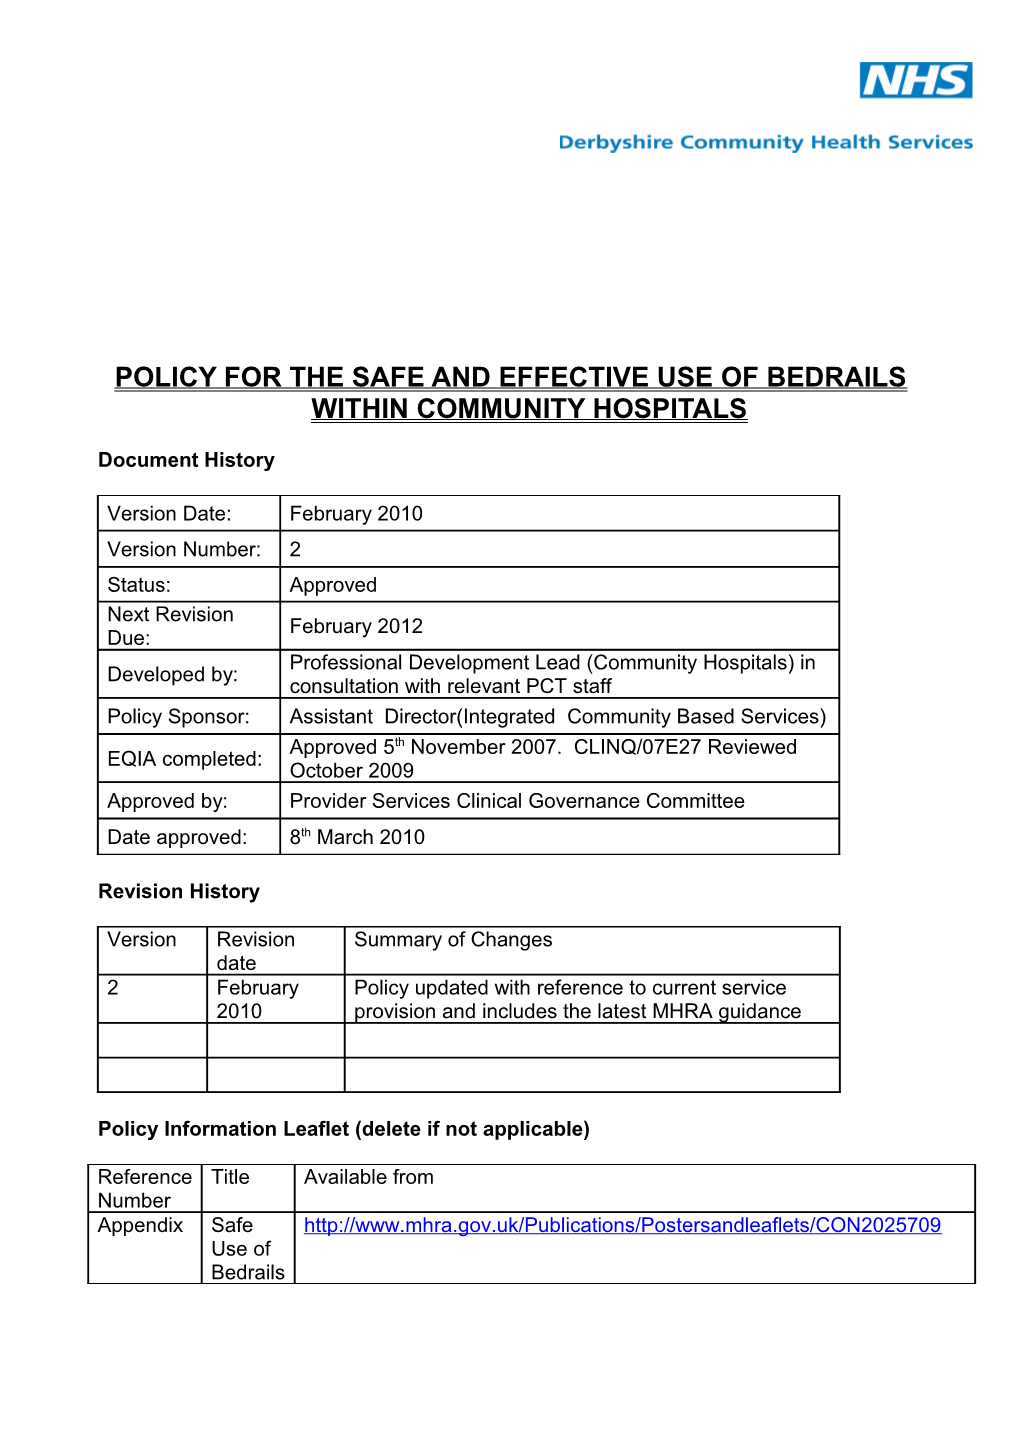 Policy for the Safe and Effective Use of Bedrails Within Community Hospitals